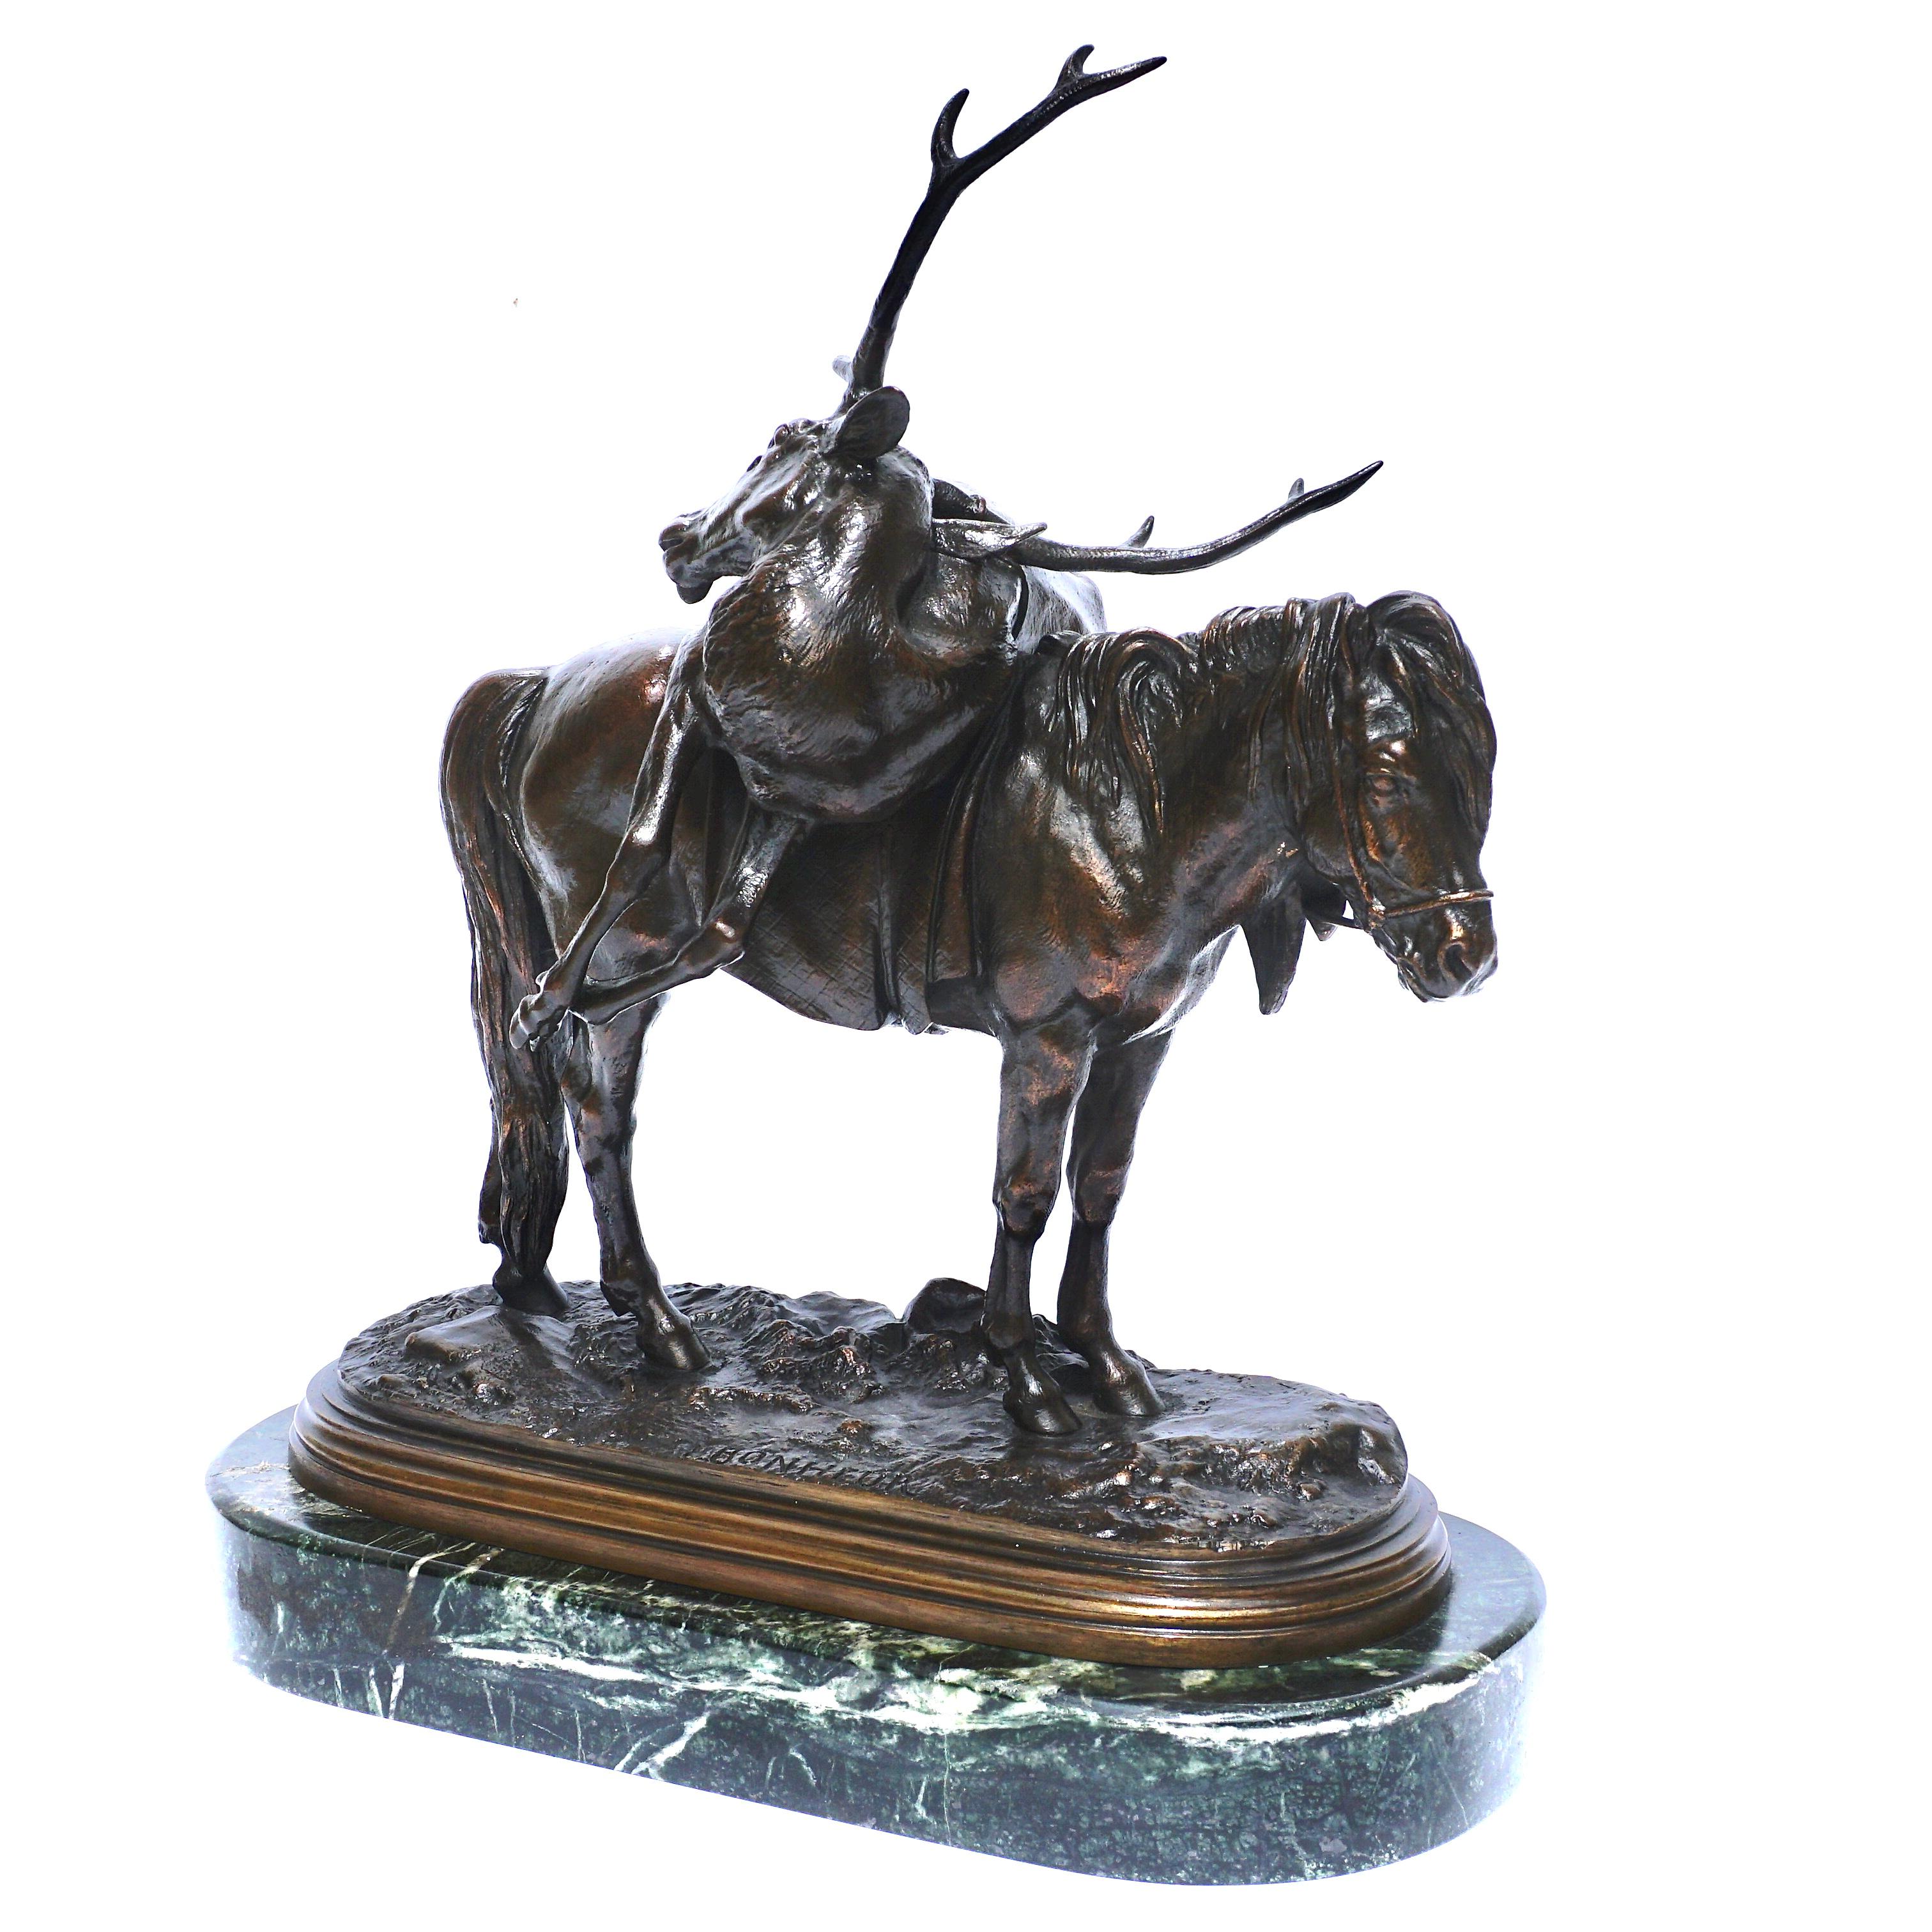 Isidore-Jules Bonheur (French, 1827-1901) 
Highland pony carrying a stag 
signed 'I. BONHEUR' (on the base) 
bronze, with brownish-black patina 

A rare and wonderful original bronze by Isidore Bonheur depicting a Scottish Highland pony carrying a